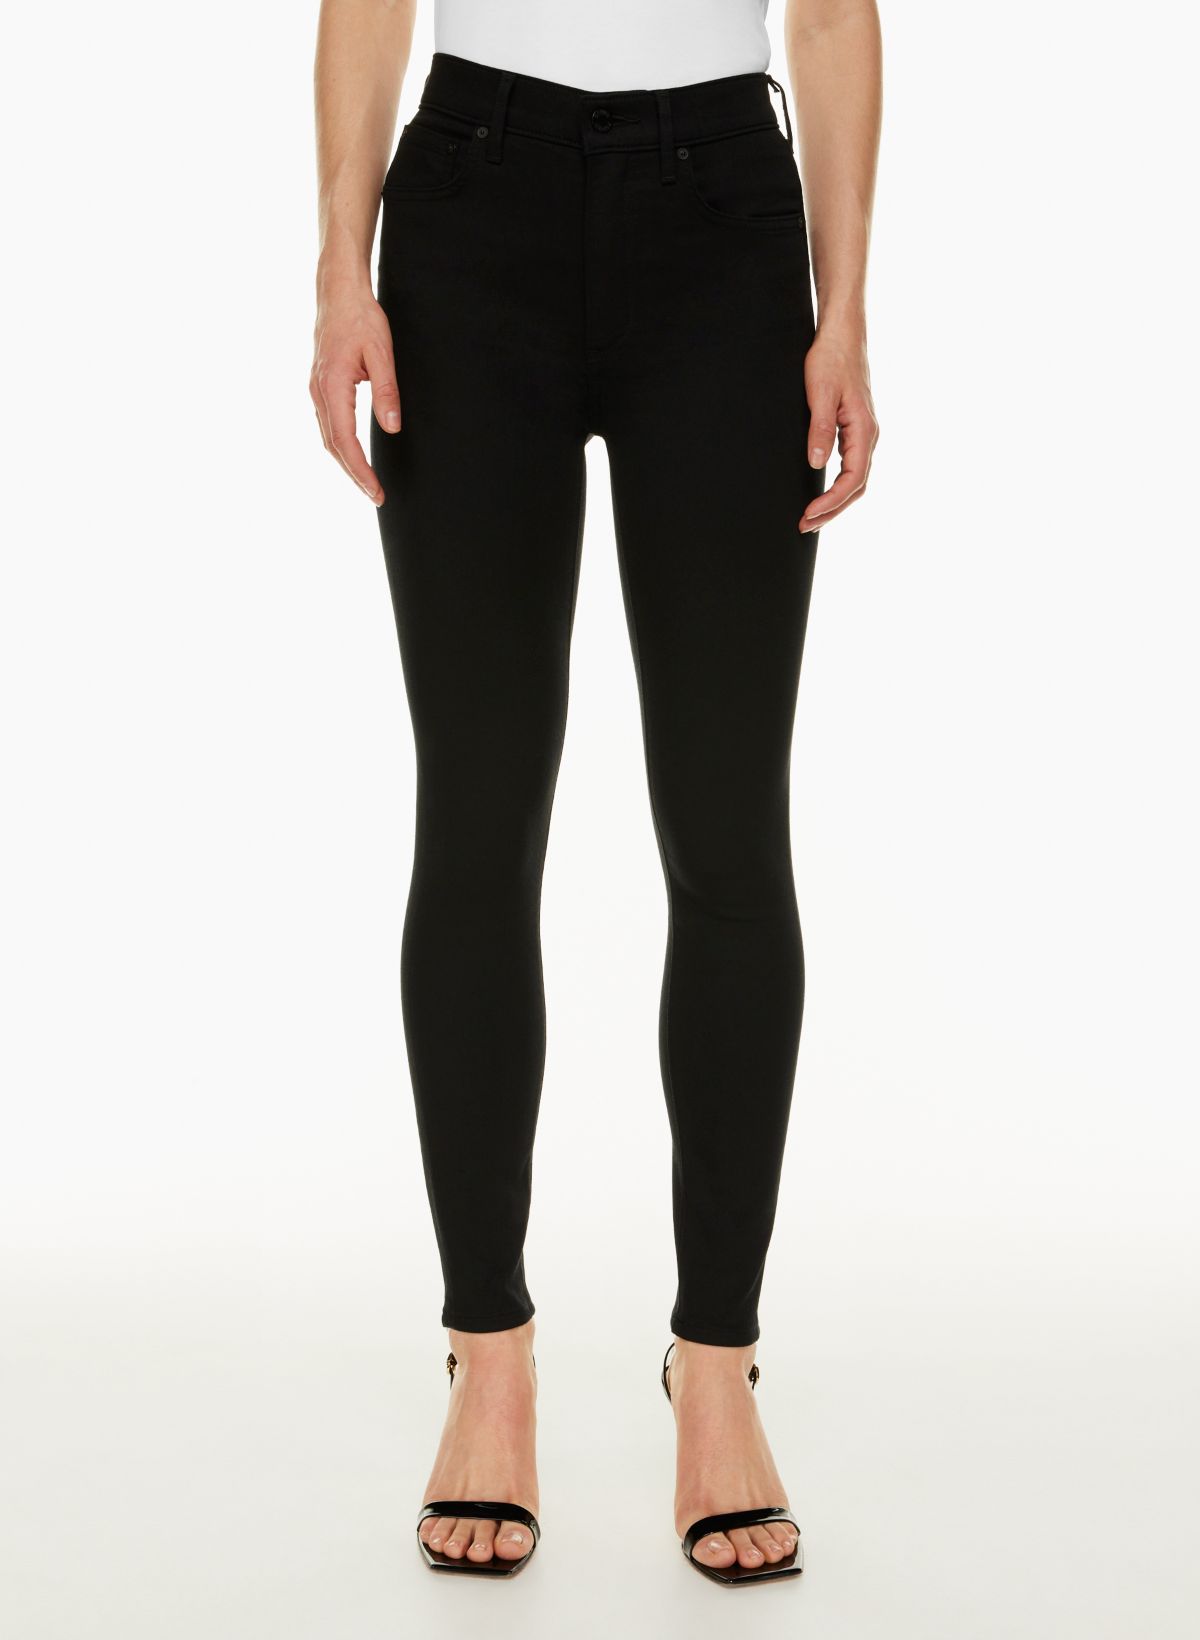 Aerie Super Flare Leggings Black Size M - $35 New With Tags